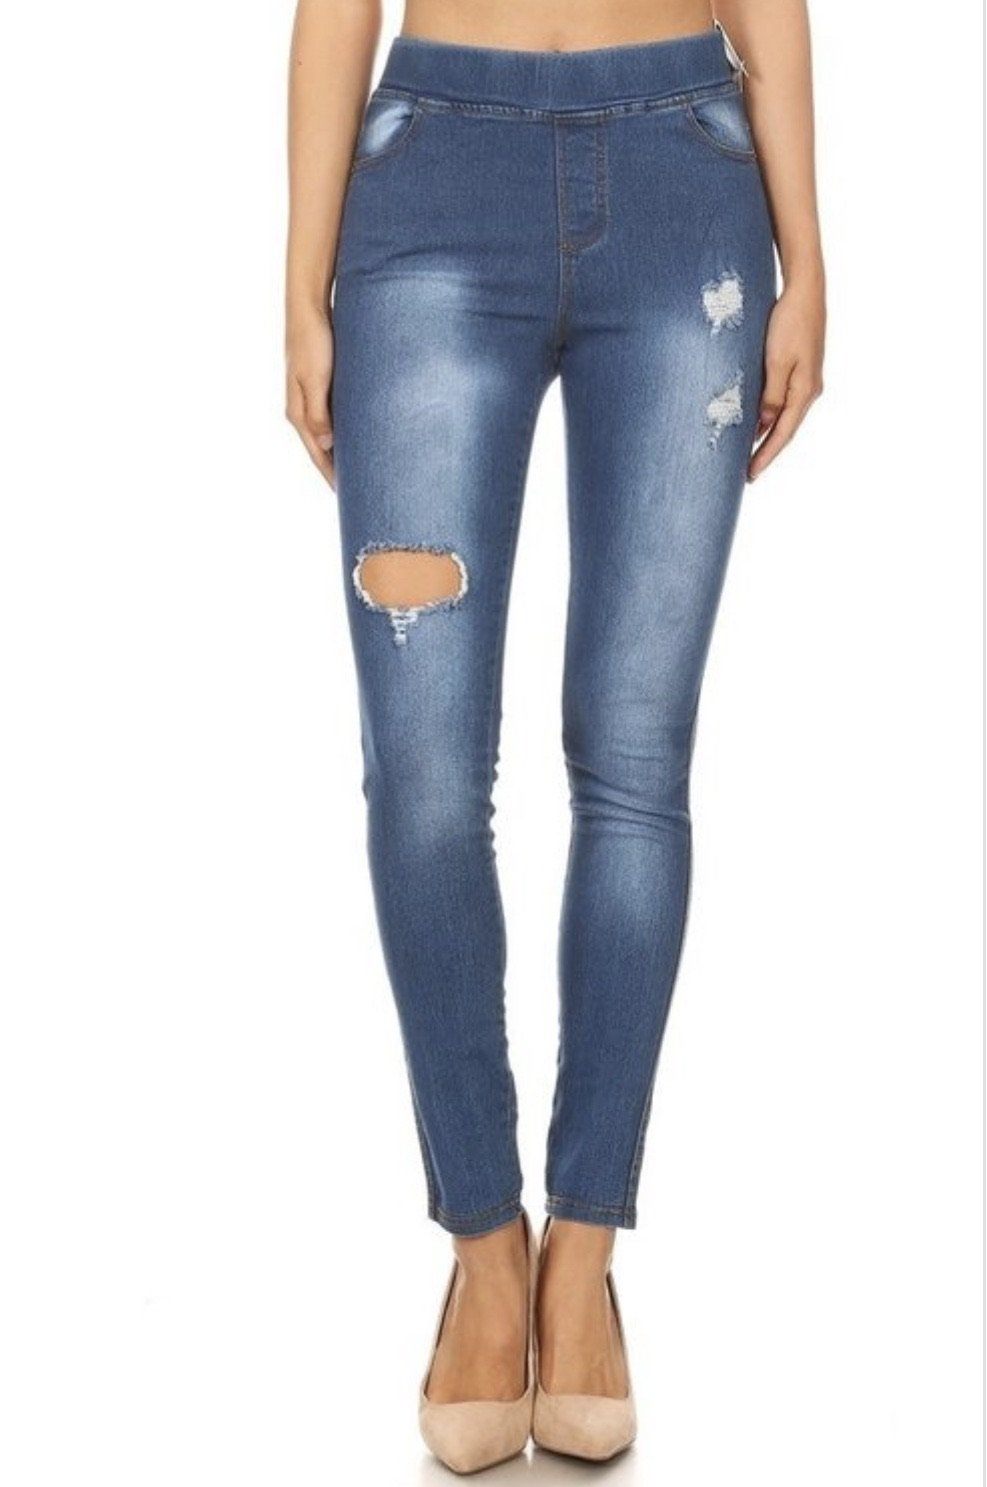 Womens Jeans & Jeggings, Ripped & Skinny Jeans